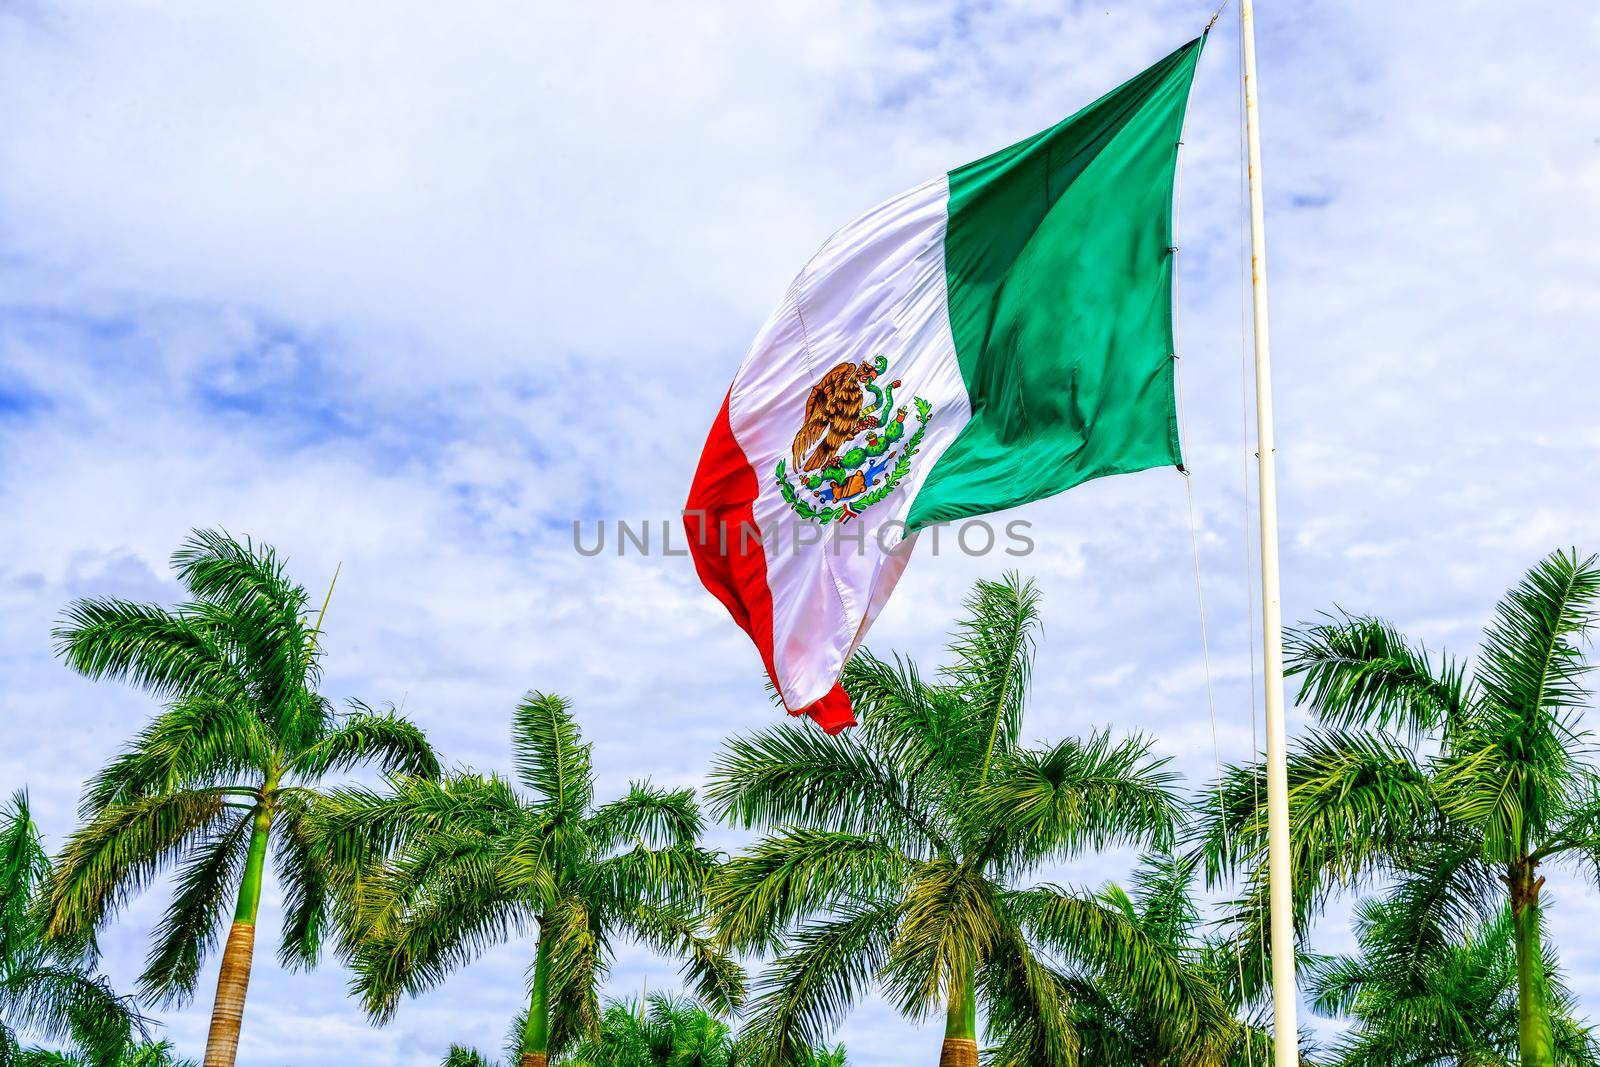 The flag of Mexico develops in the wind against a blue sky and tropical trees. United States of Mexico.